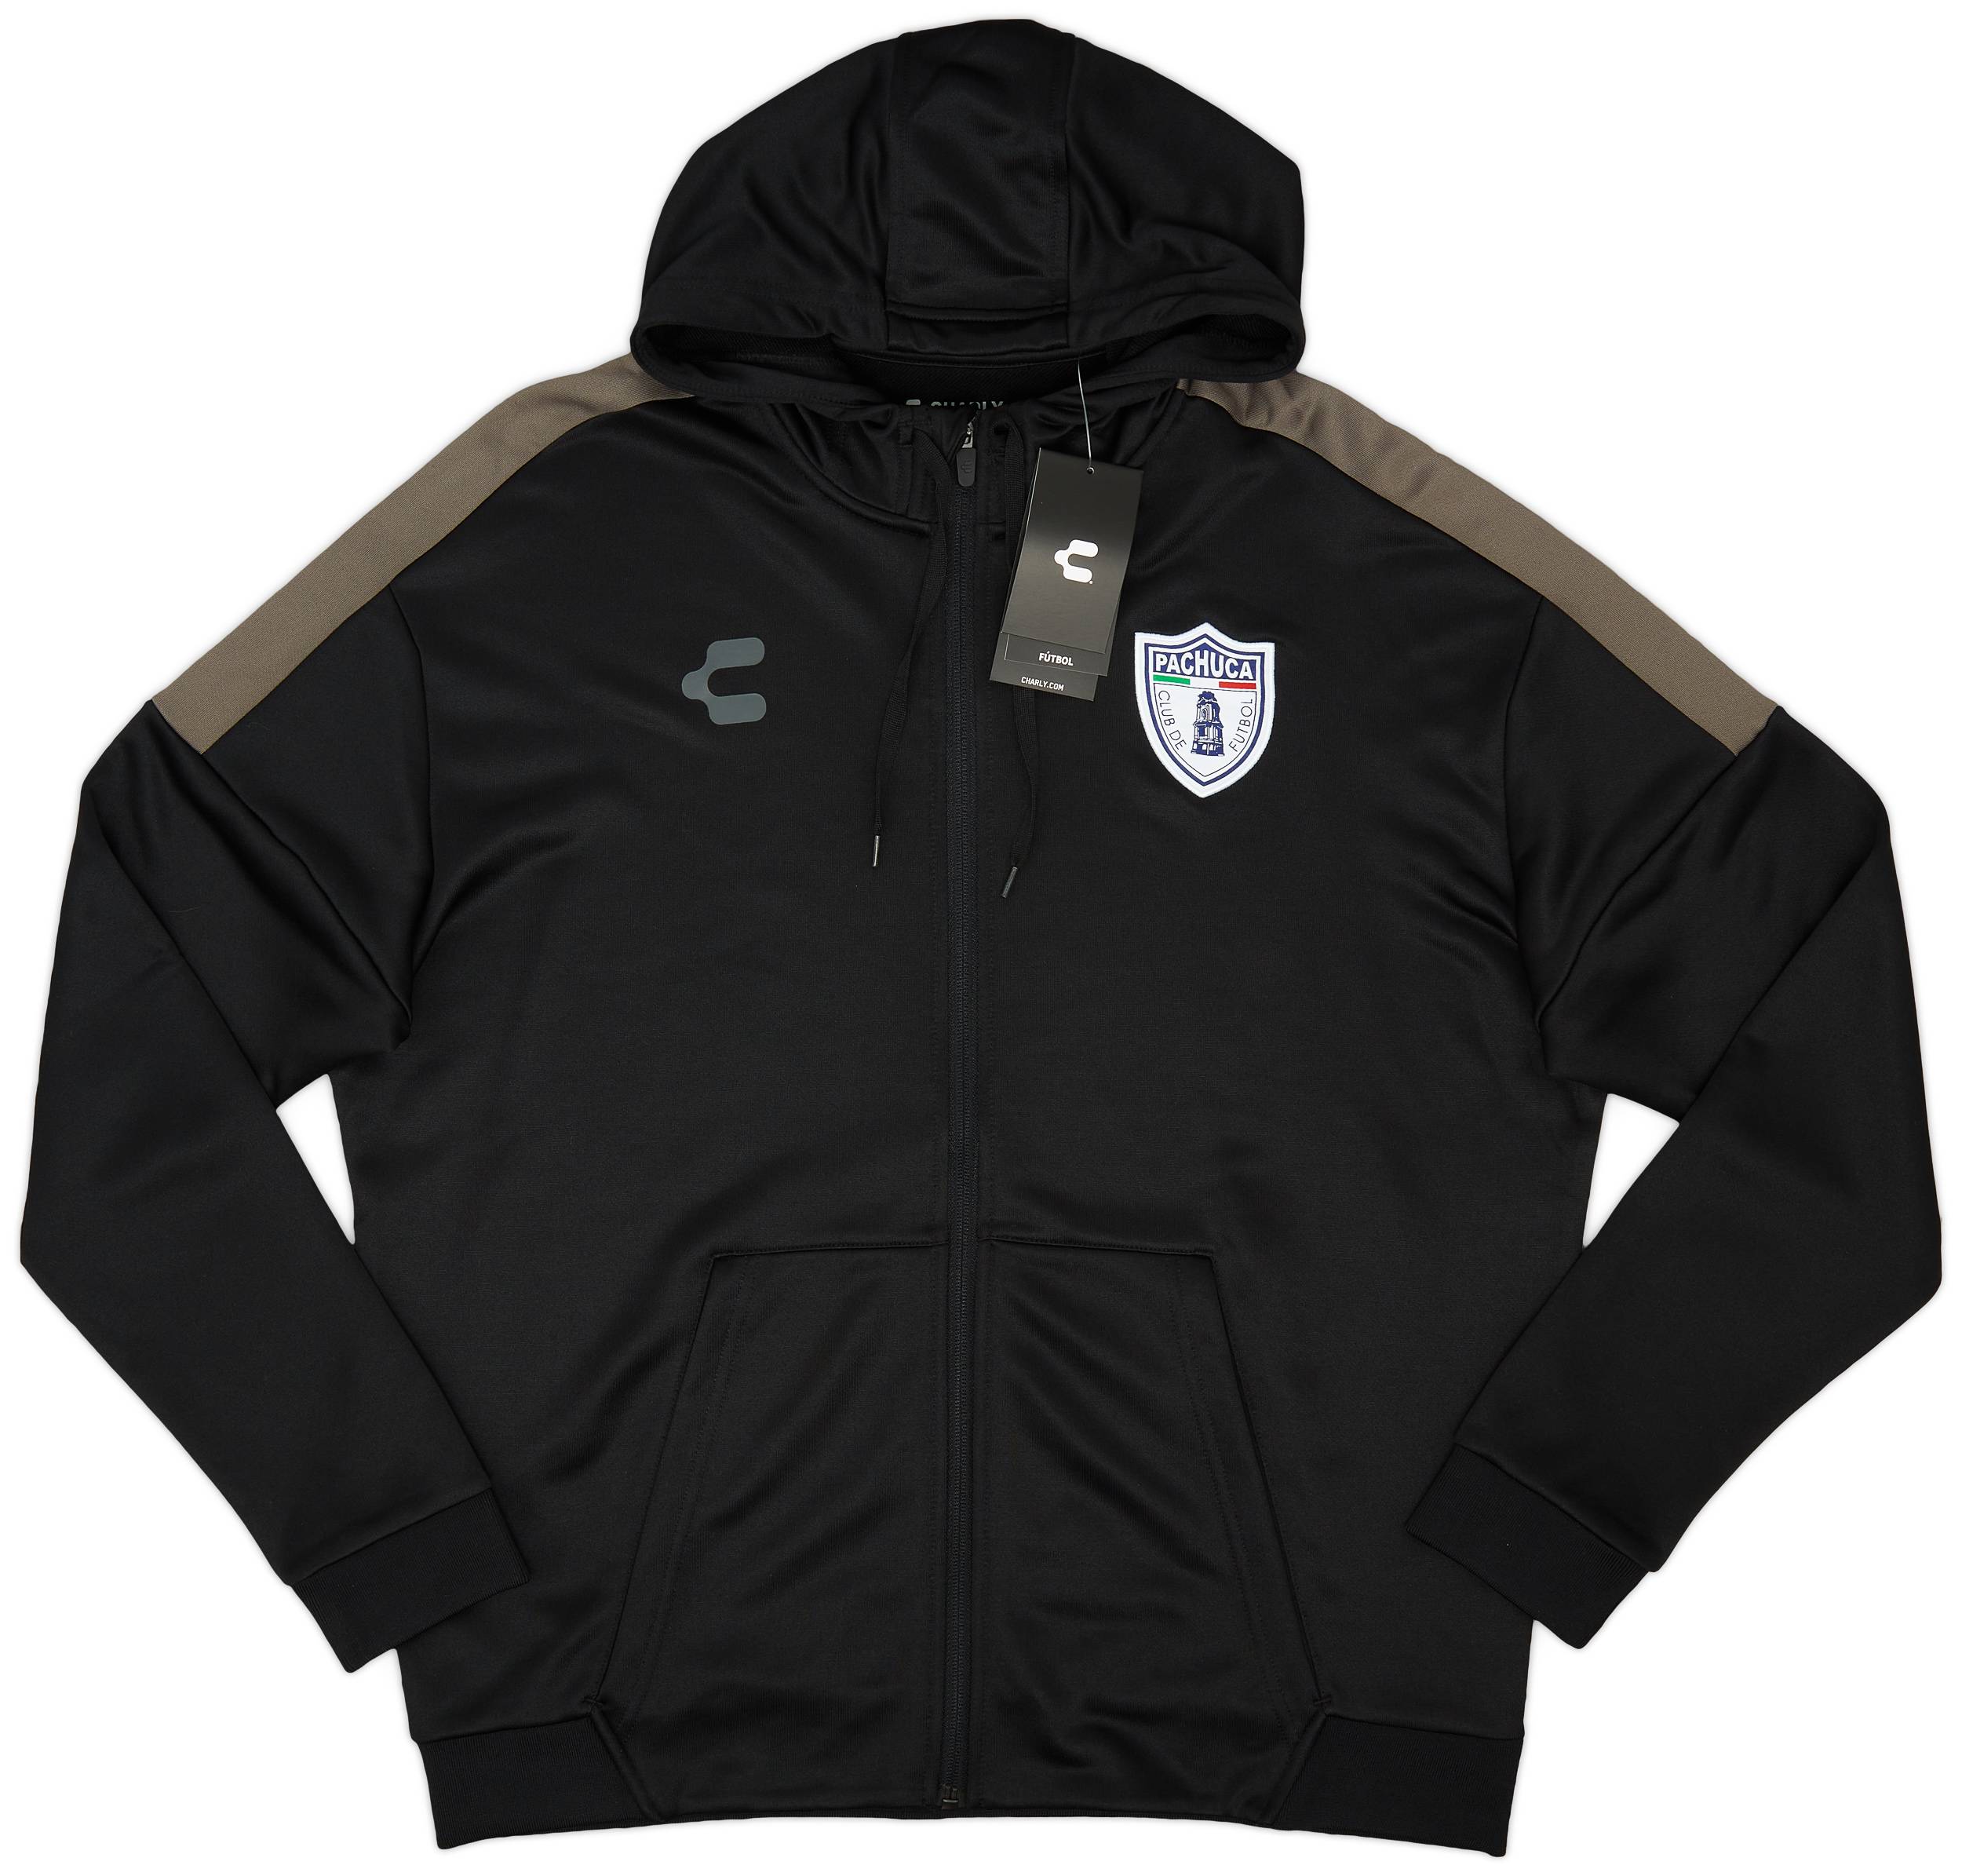 2021-22 Pachuca Charly Hooded Jacket